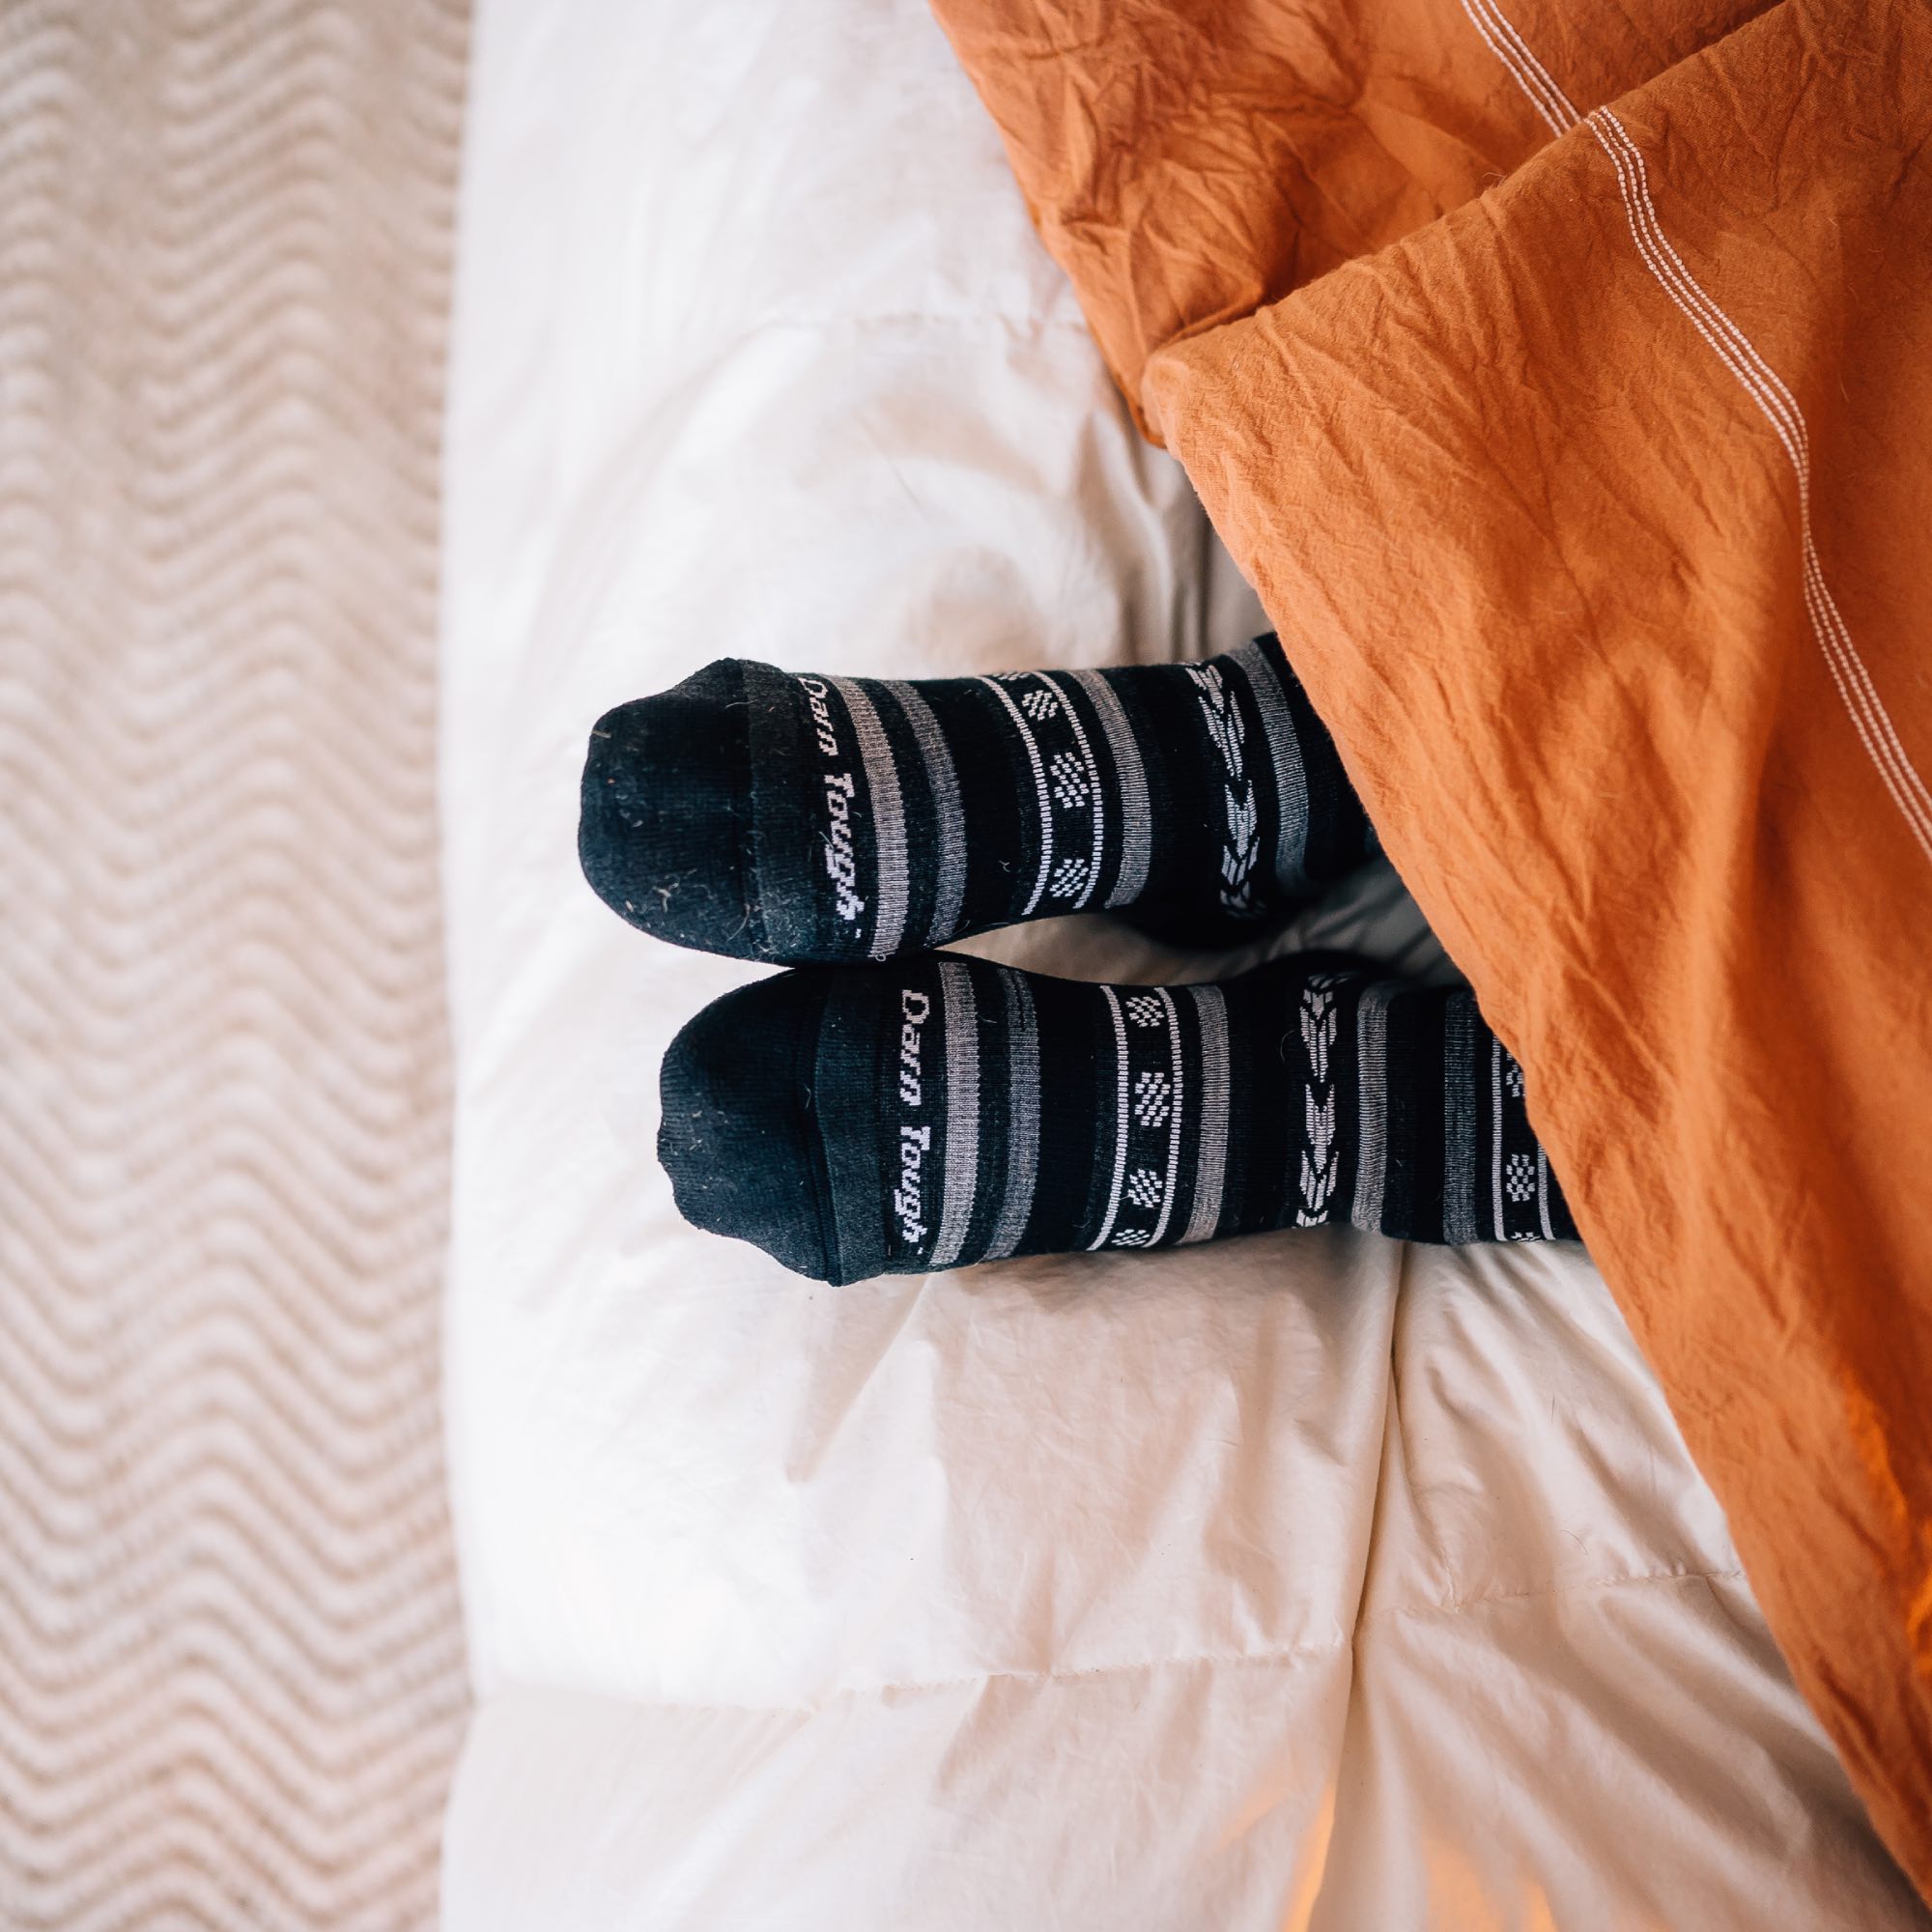 Should You Be Sleeping with Your Socks On?